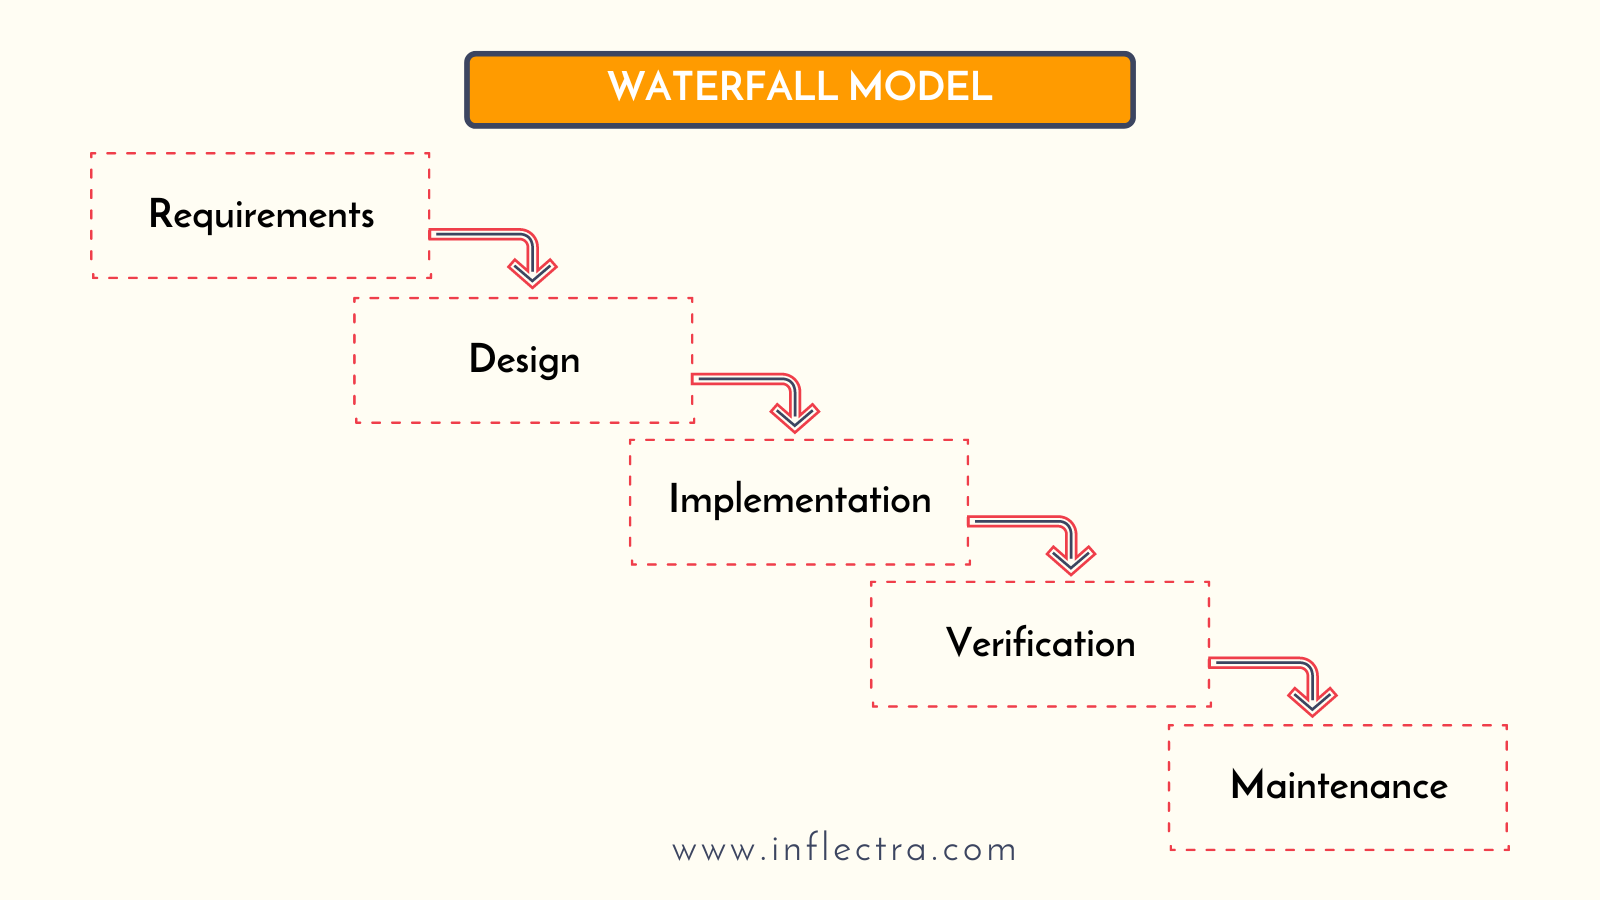 waterfall-model-image-inflectra